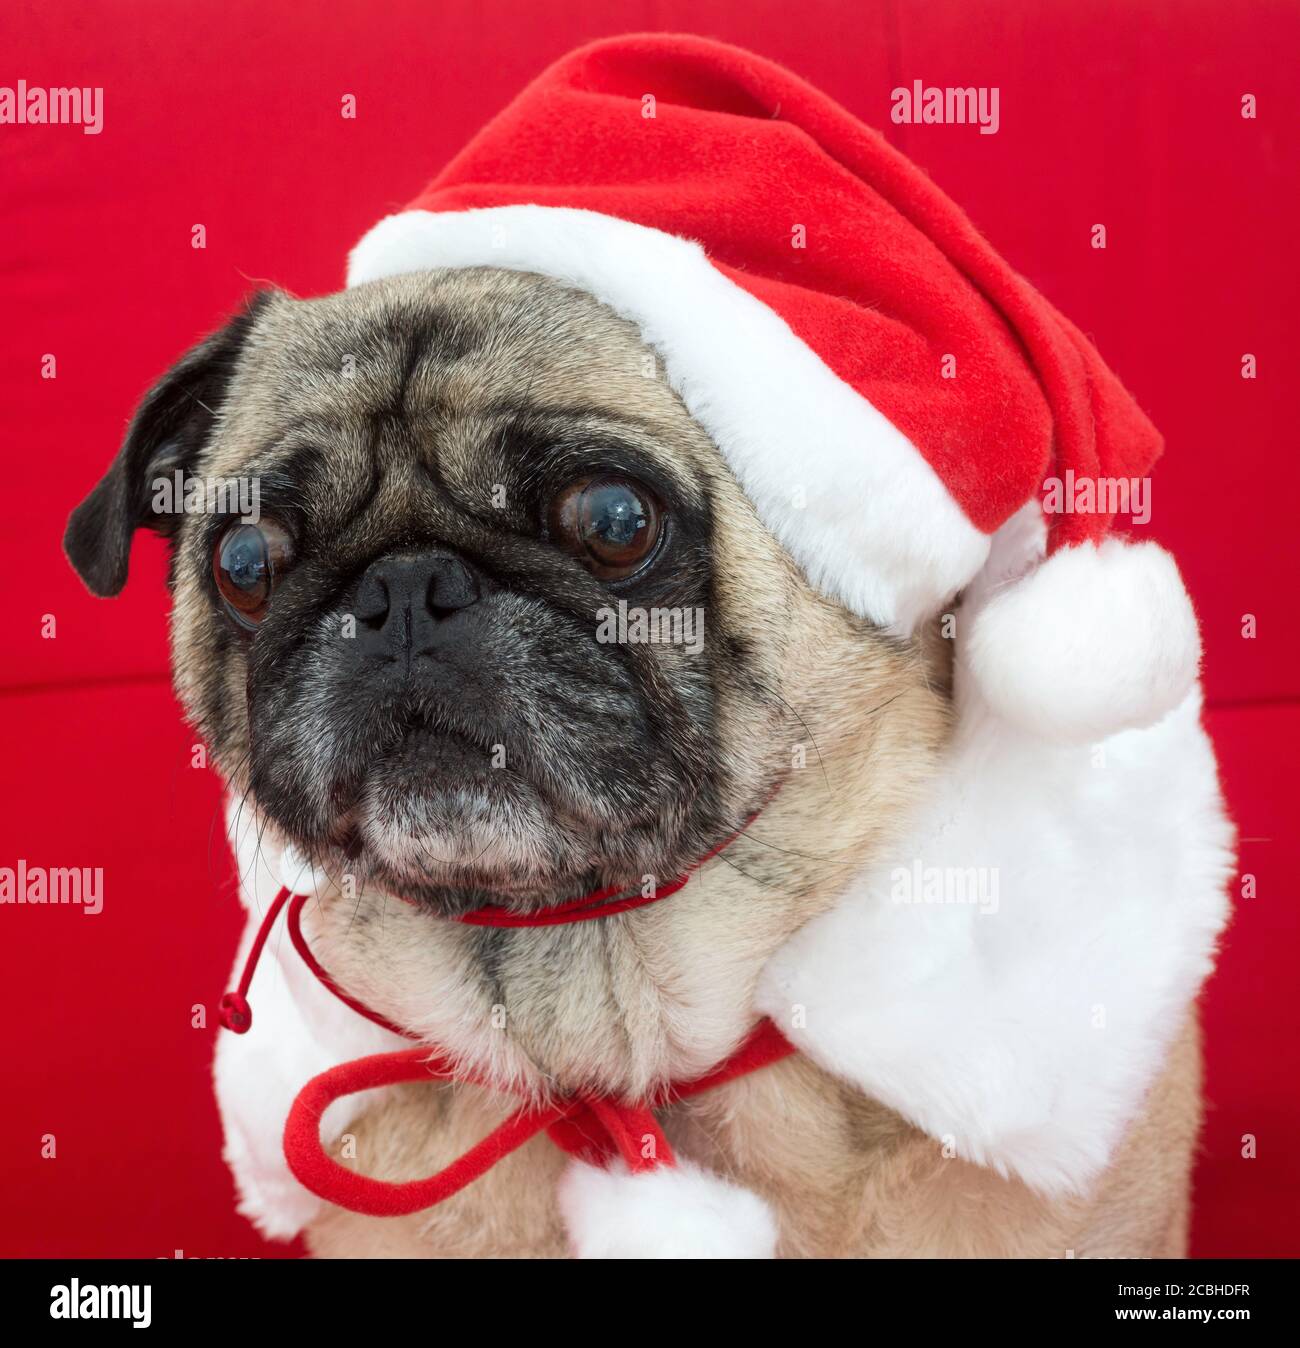 Pug Dressed up for Christmas on Red Couch Stock Photo